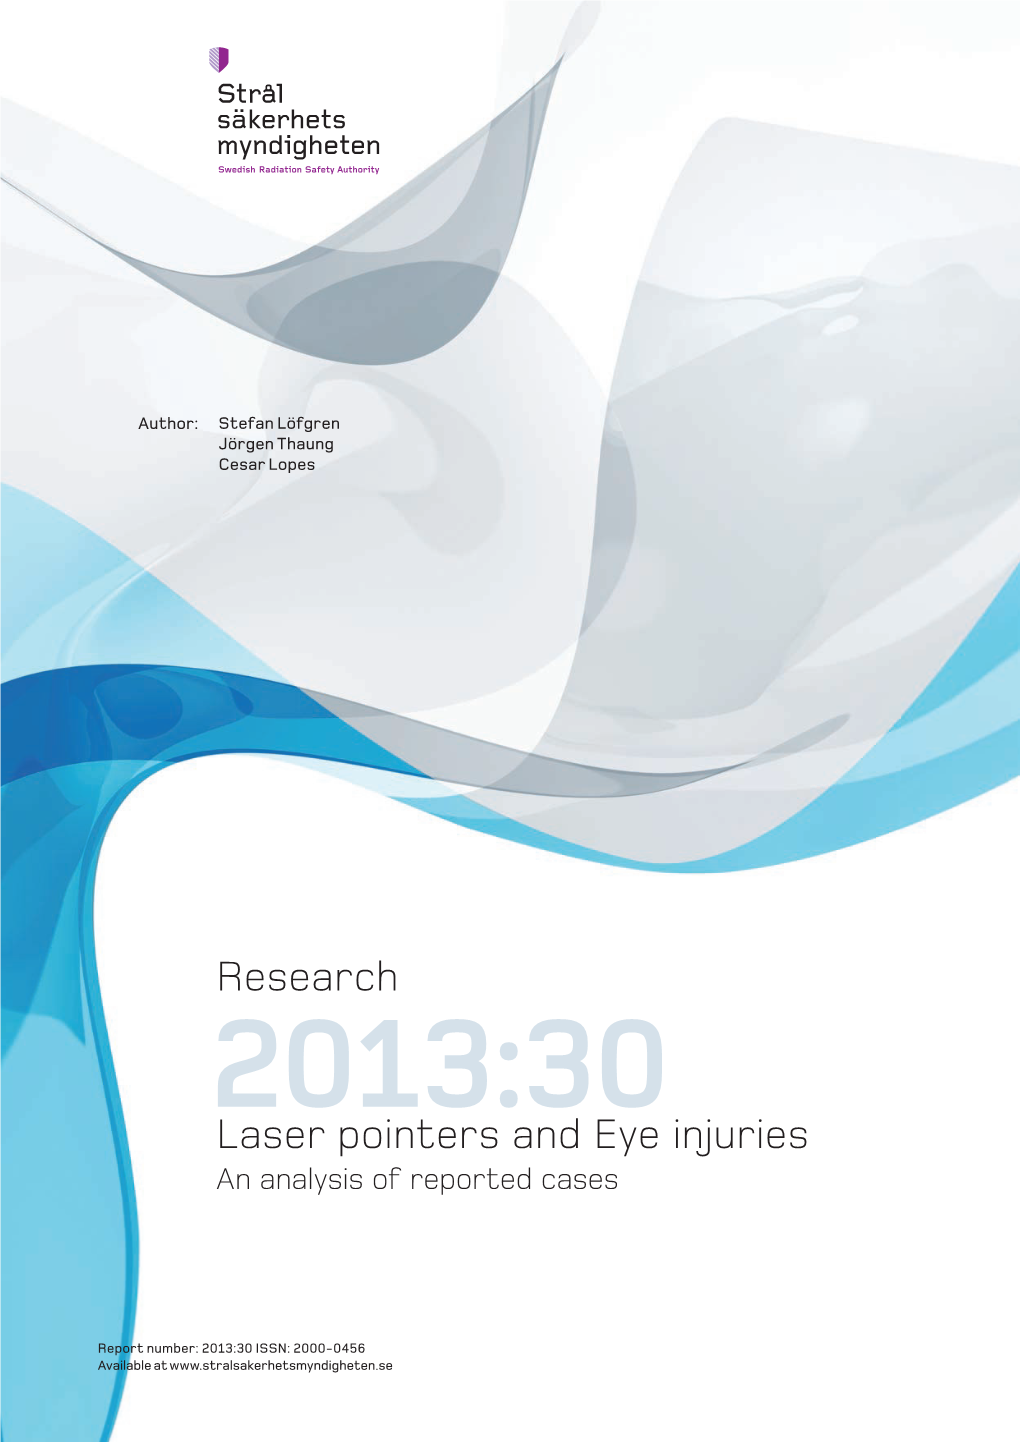 2013:30 Laser Pointers and Eye Injuries an Analysis of Reported Cases